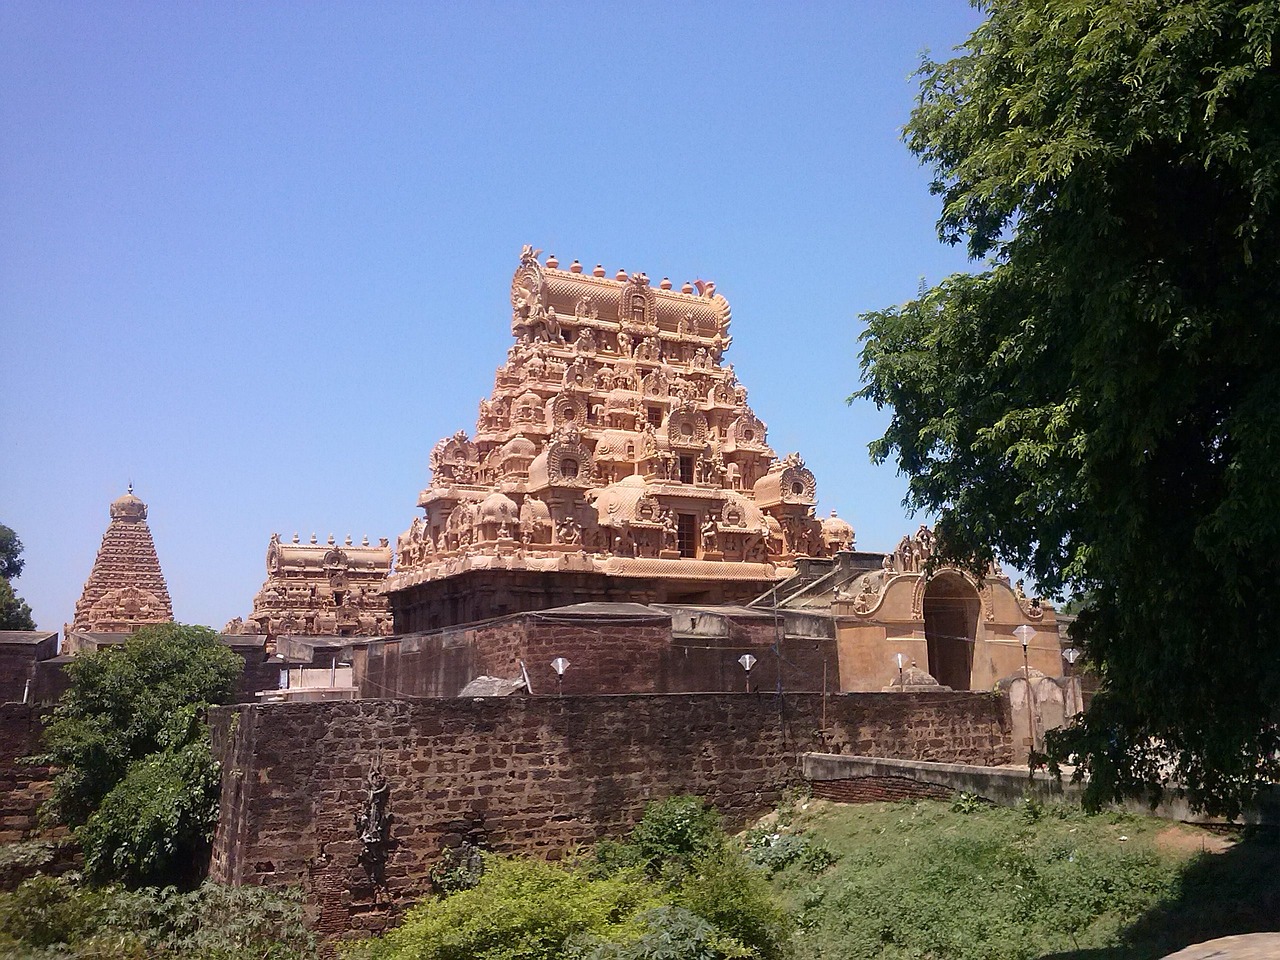 1 Day in Thanjavur India